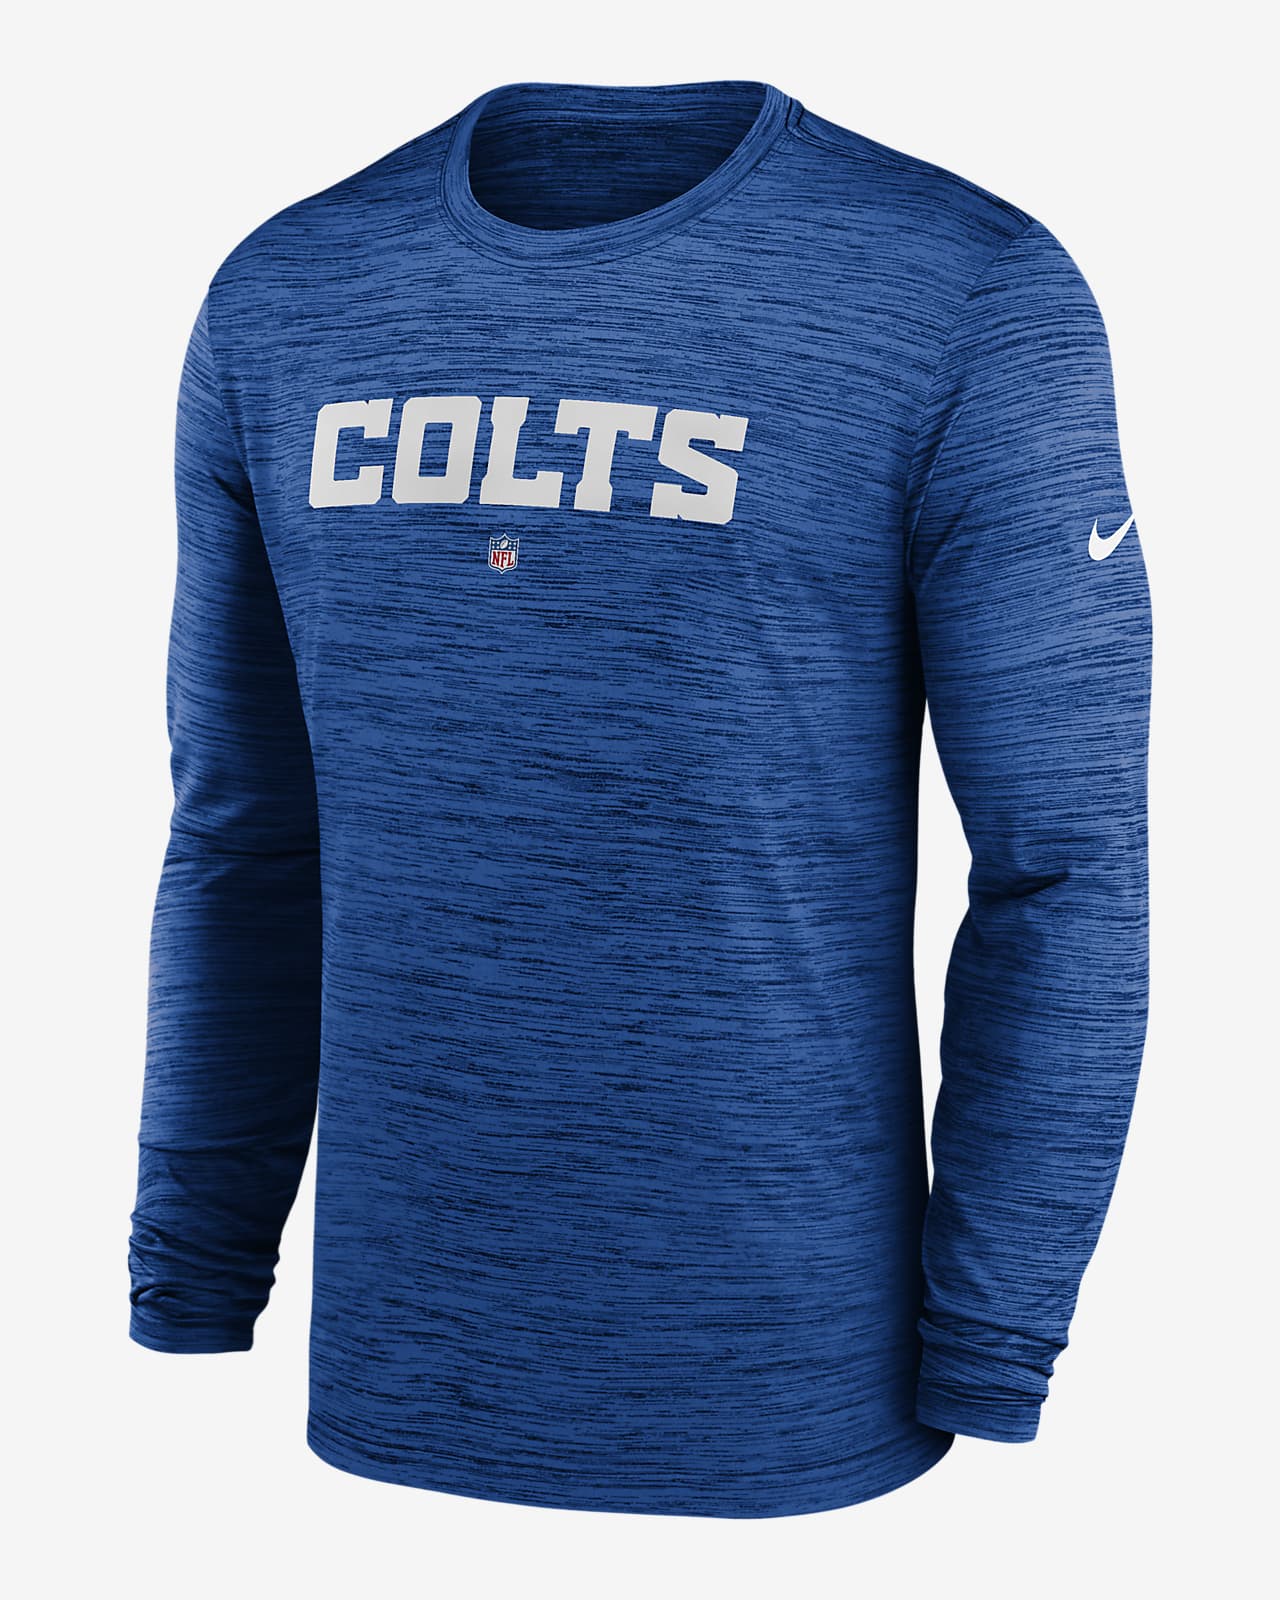 Nike Dri-FIT Sideline Velocity (NFL Indianapolis Colts) Men's Long-Sleeve  T-Shirt